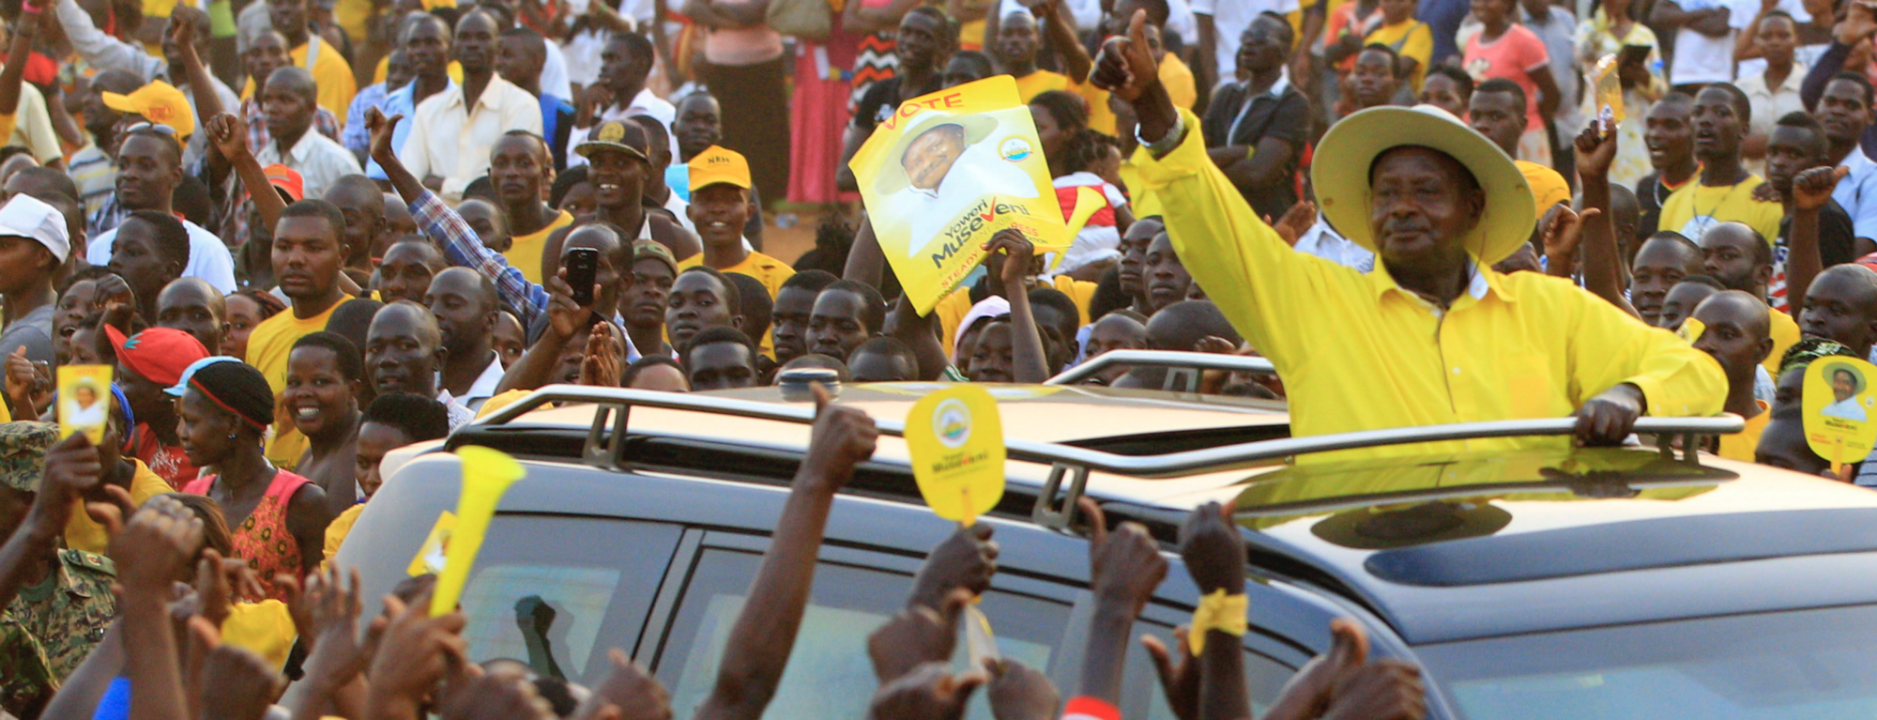 In this photo from the 2016 Ugandan presidential election, Uganda’s President and the presidential candidate Yoweri Museveni of the ruling party National Resistance Movement (NRM) waves to his supporters as he arrives at a campaign rally in Entebbe, Uganda, February 10, 2016. 